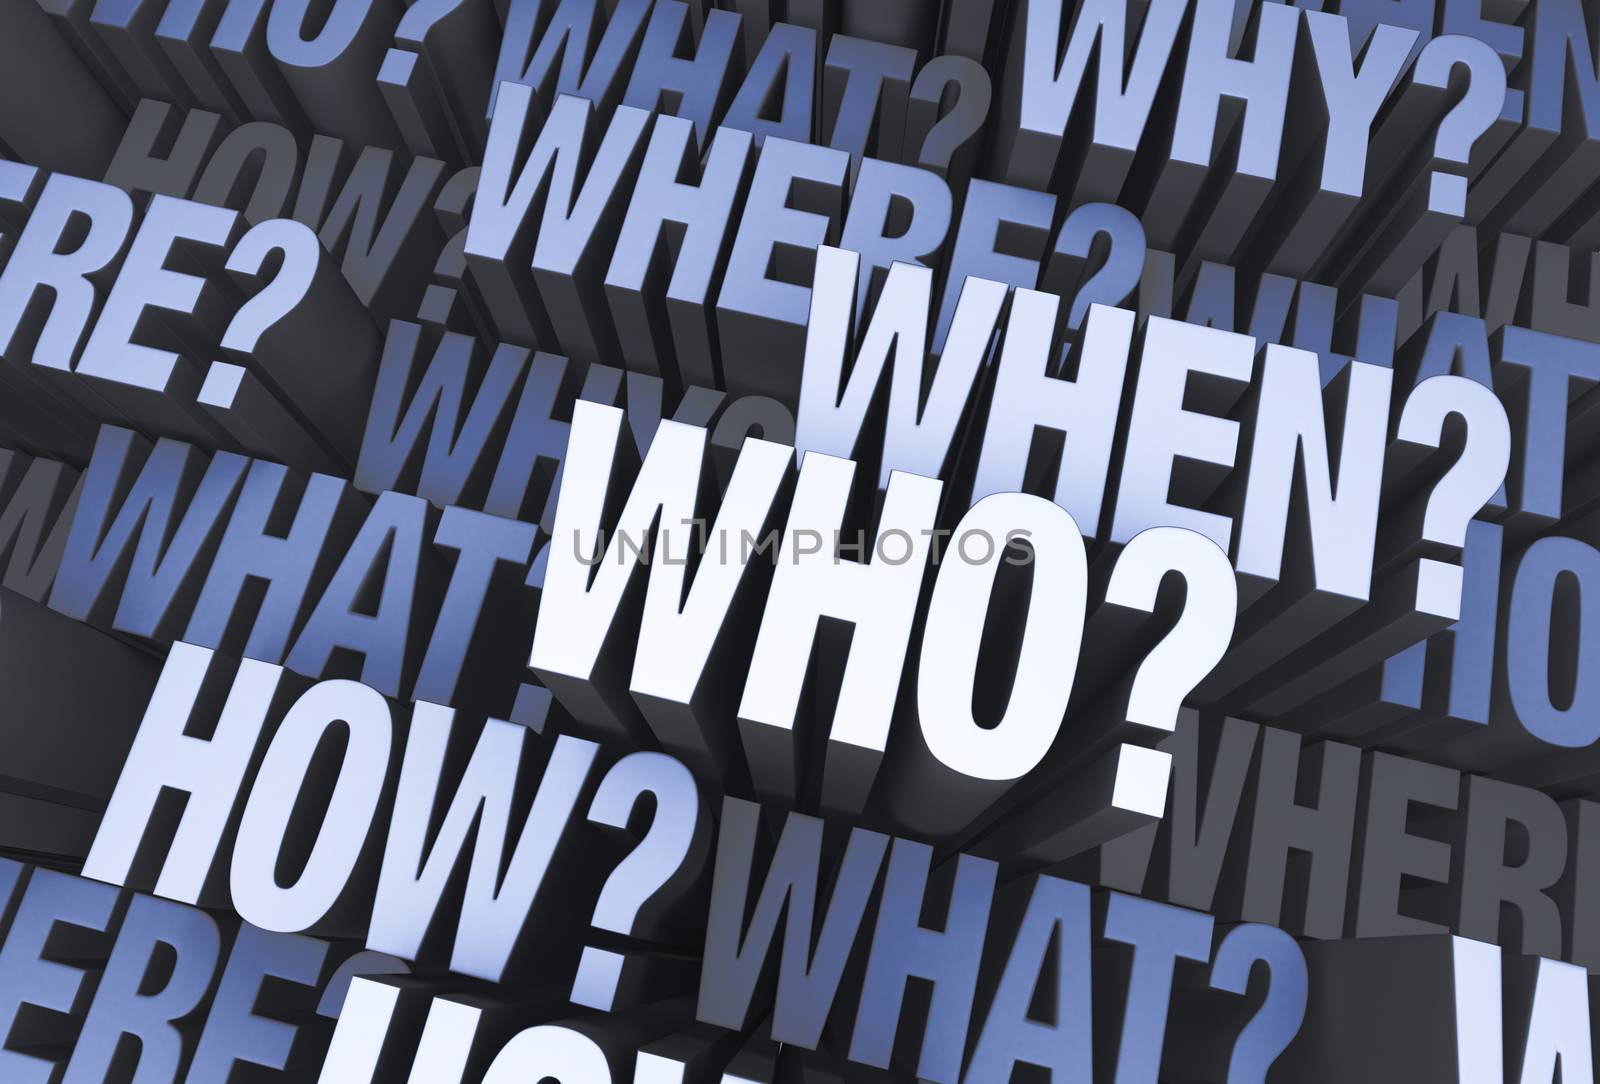 A 3D blue gray background filled with "WHO?", "WHAT?", "WHERE?", "WHEN?", "HOW?", and "WHY?" at different depths.